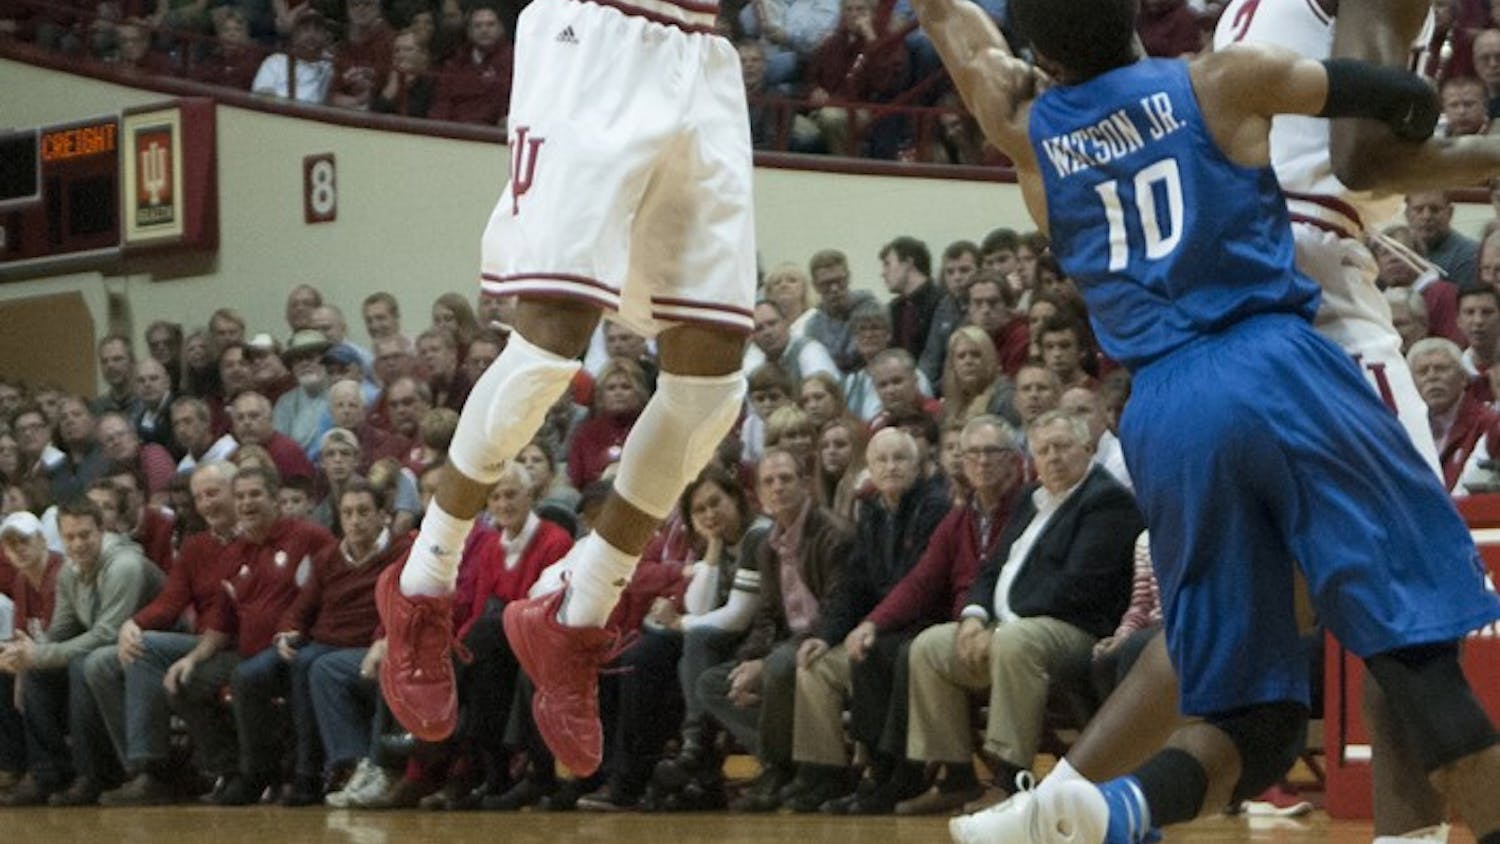 Sophomore guard James Blackmon Jr. shoots a three during the game against Creighton on Thursday at Assembly Hall.